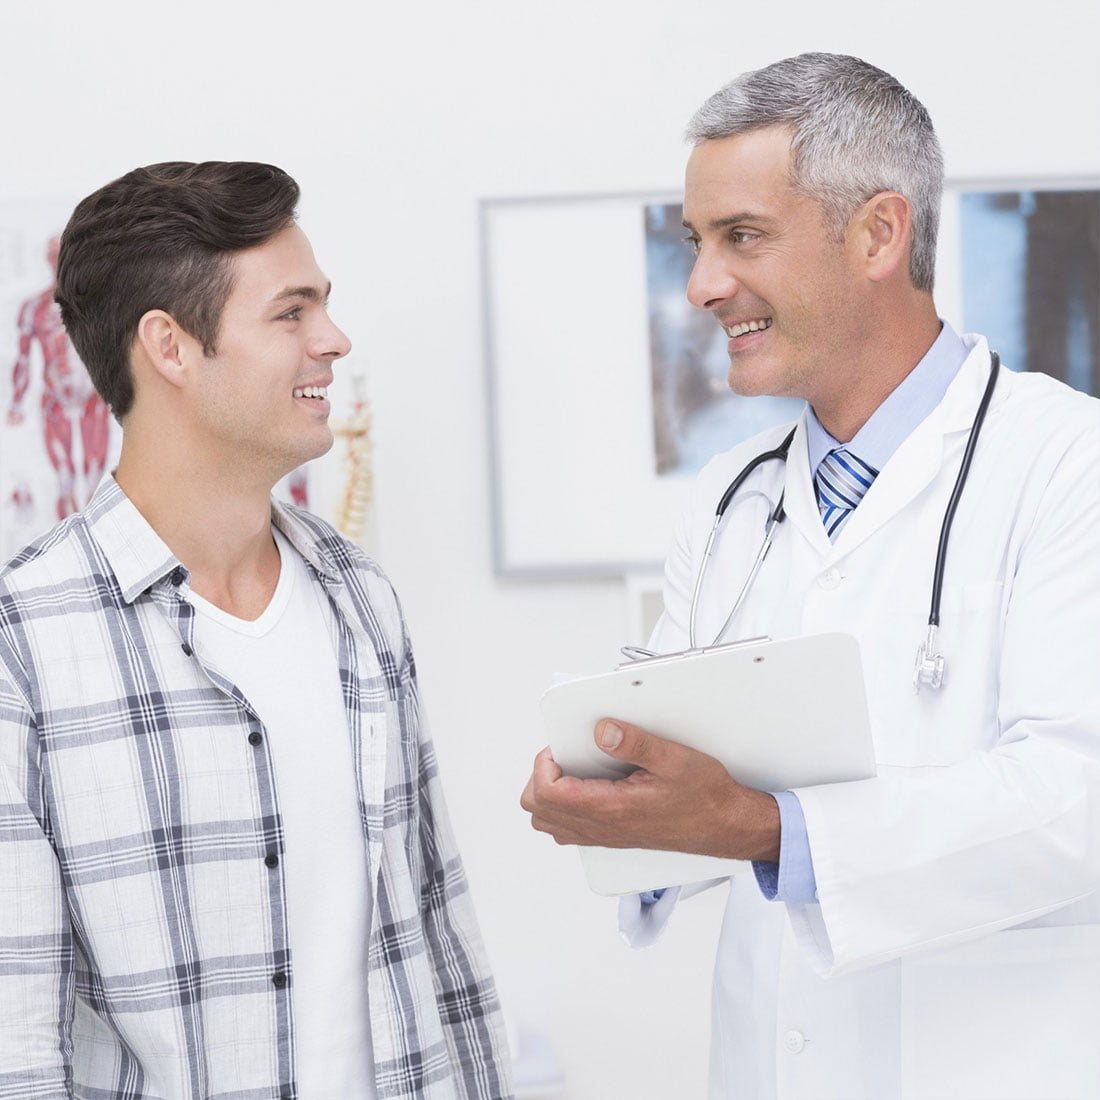 Sports Physical Exam | Doctor with a Satisfied Patient